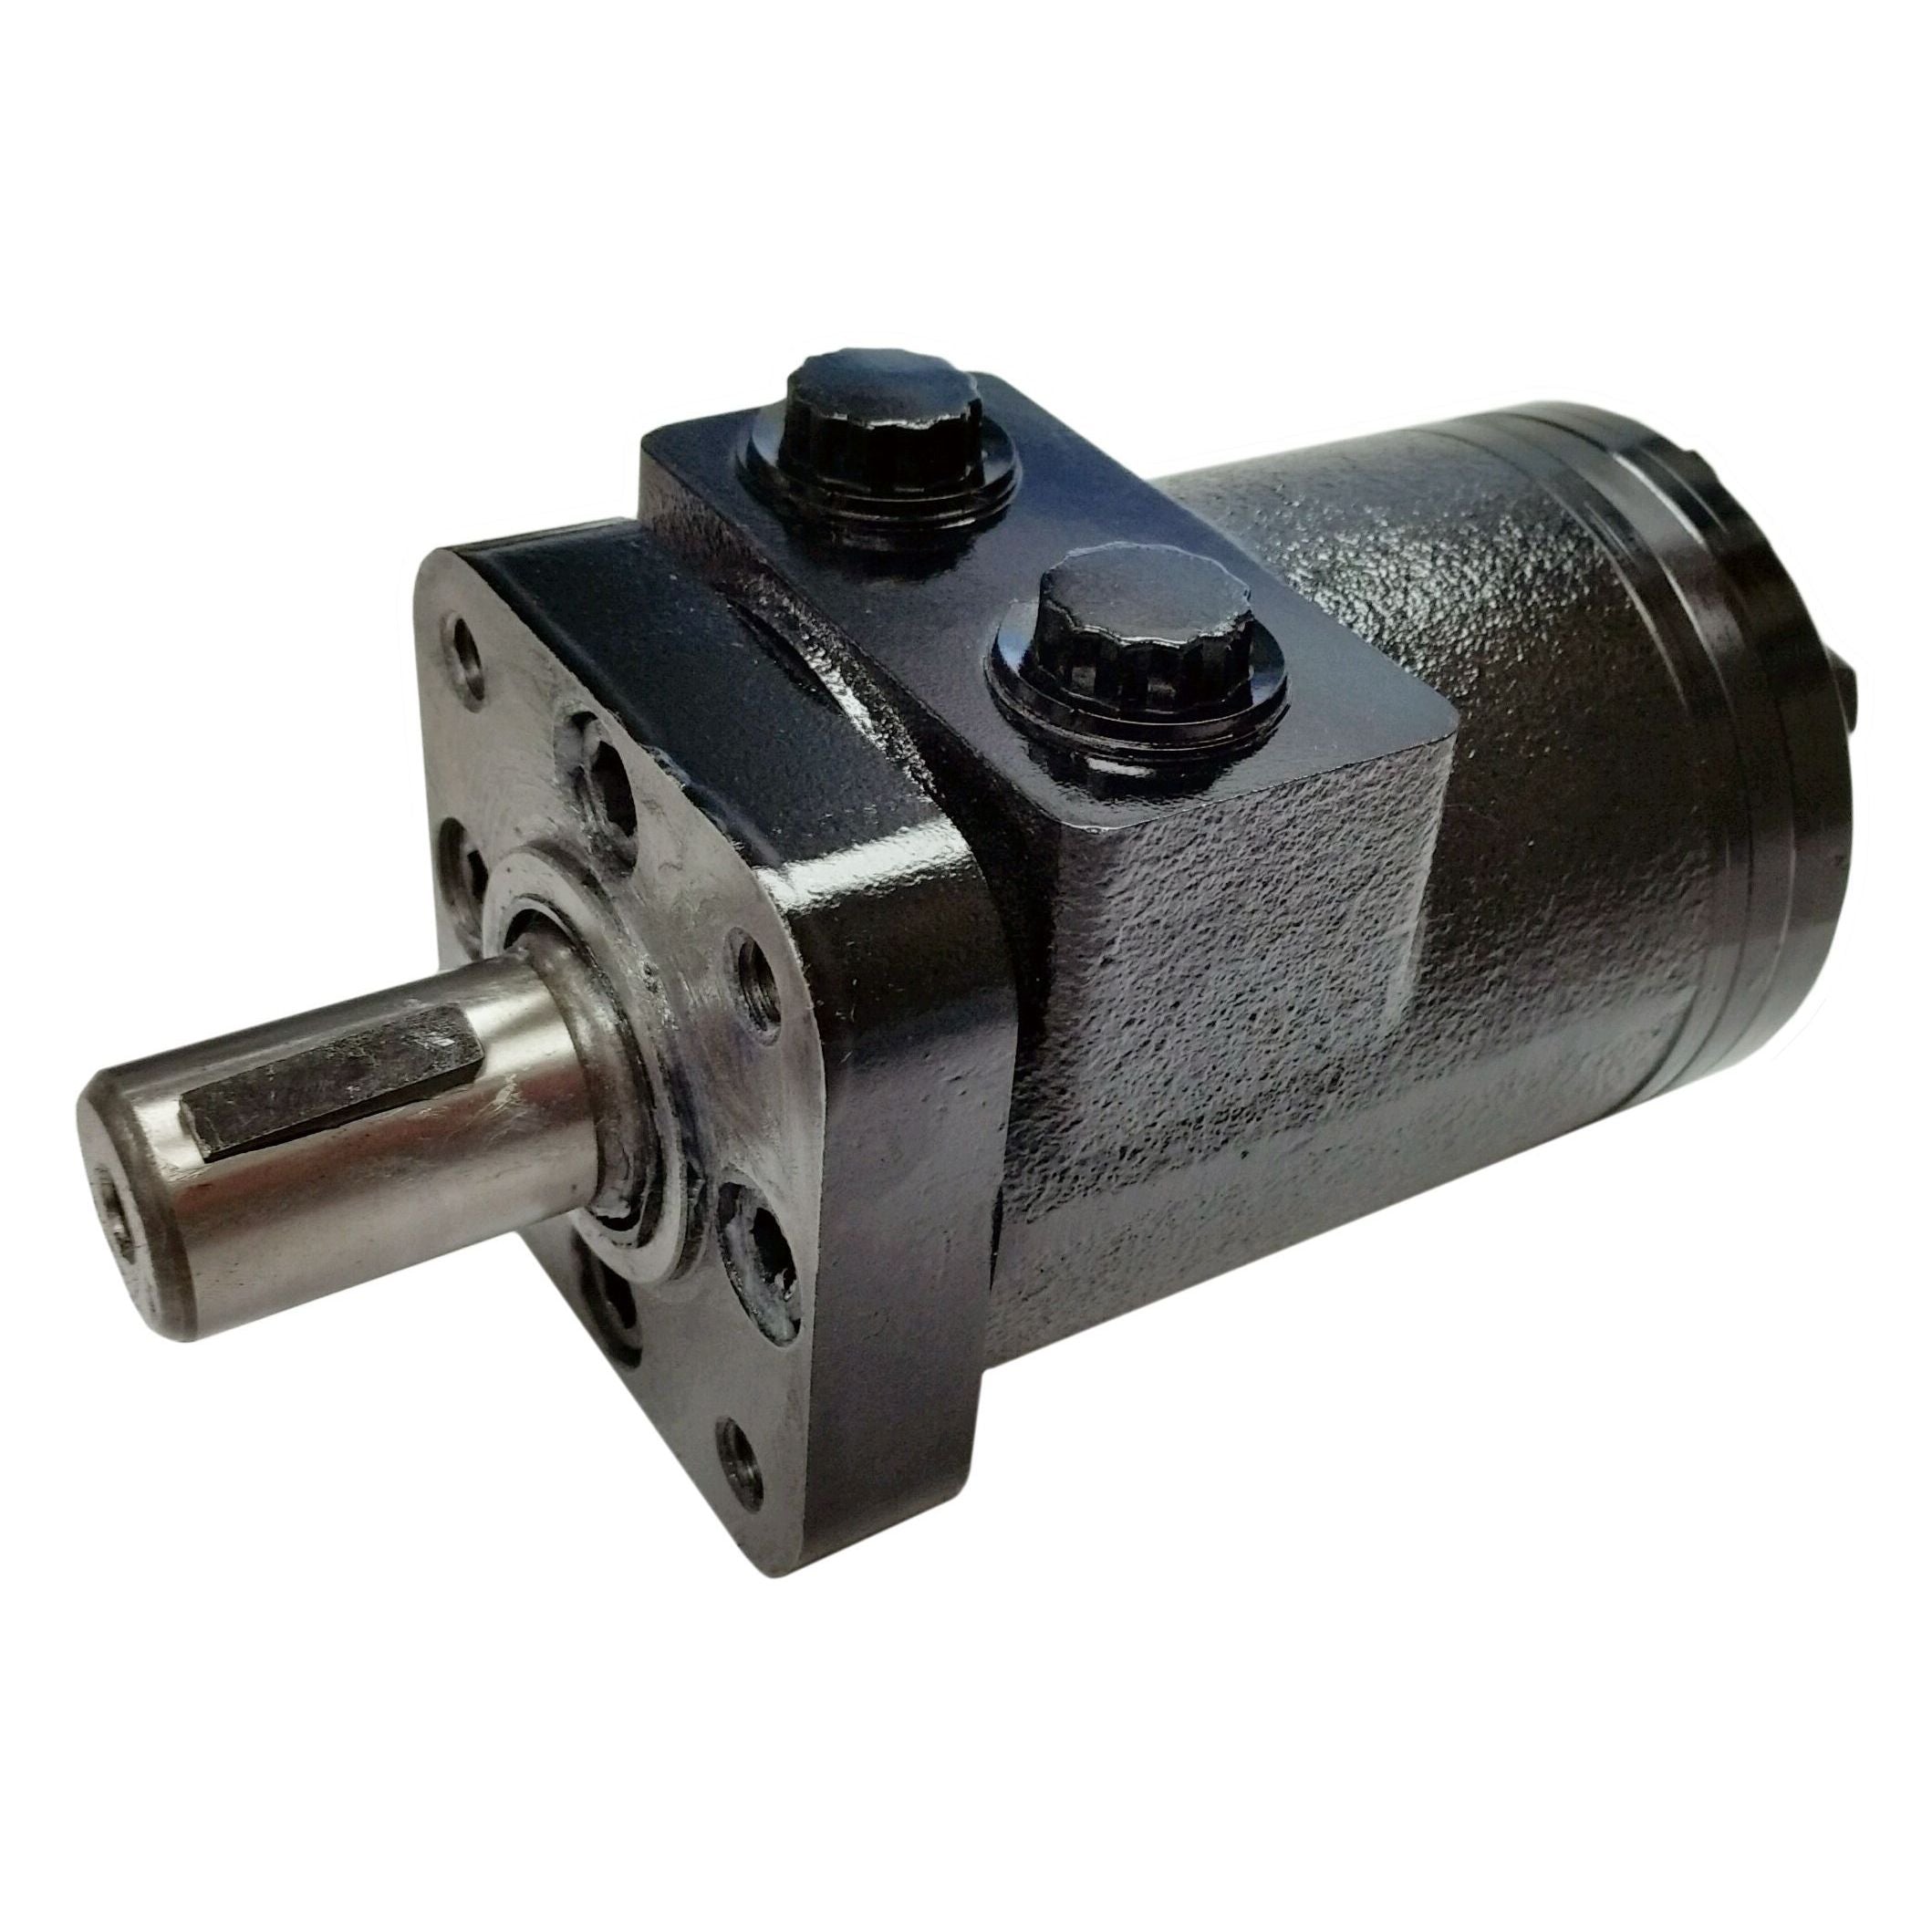 BMPH-250-H4-K-F : Dynamic LSHT Motor, 240cc, 250RPM, 3363in-lb, 2031psi Differential, 15.85GPM, SAE A 4-Bolt Mount, 1" Bore x 1/4" Key Shaft, Side Ported, Manifold